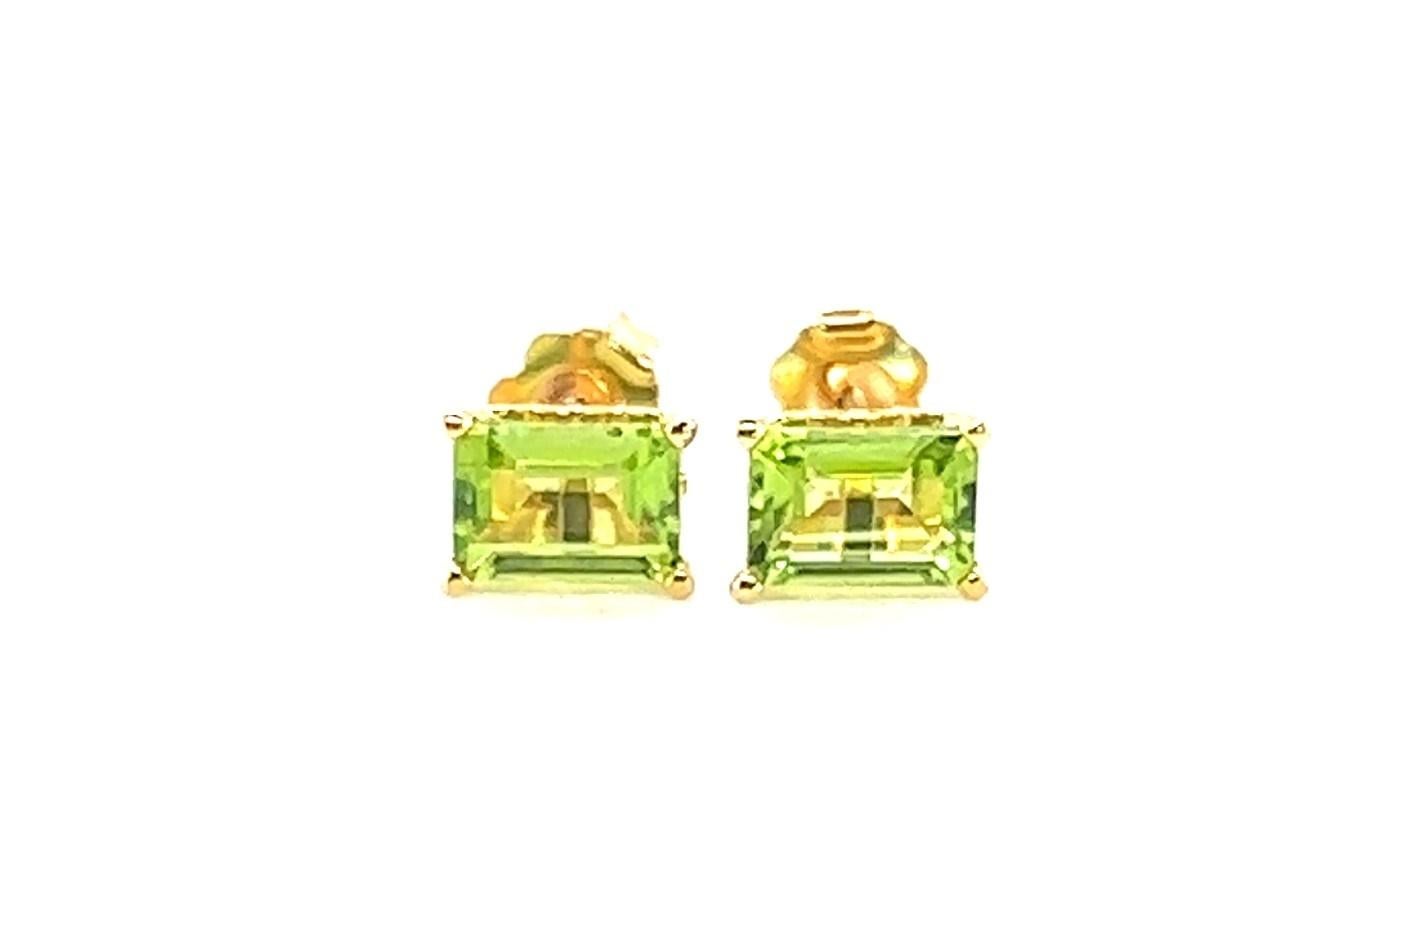 14kt yellow gold stud earrings containing approximately 2.00 carats of rectangular cut peridot. The peridot is a gorgeous lime green color. It's the color of new leaves in the spring. 

The earrings measure 5/16inch long. The settings have a lovely